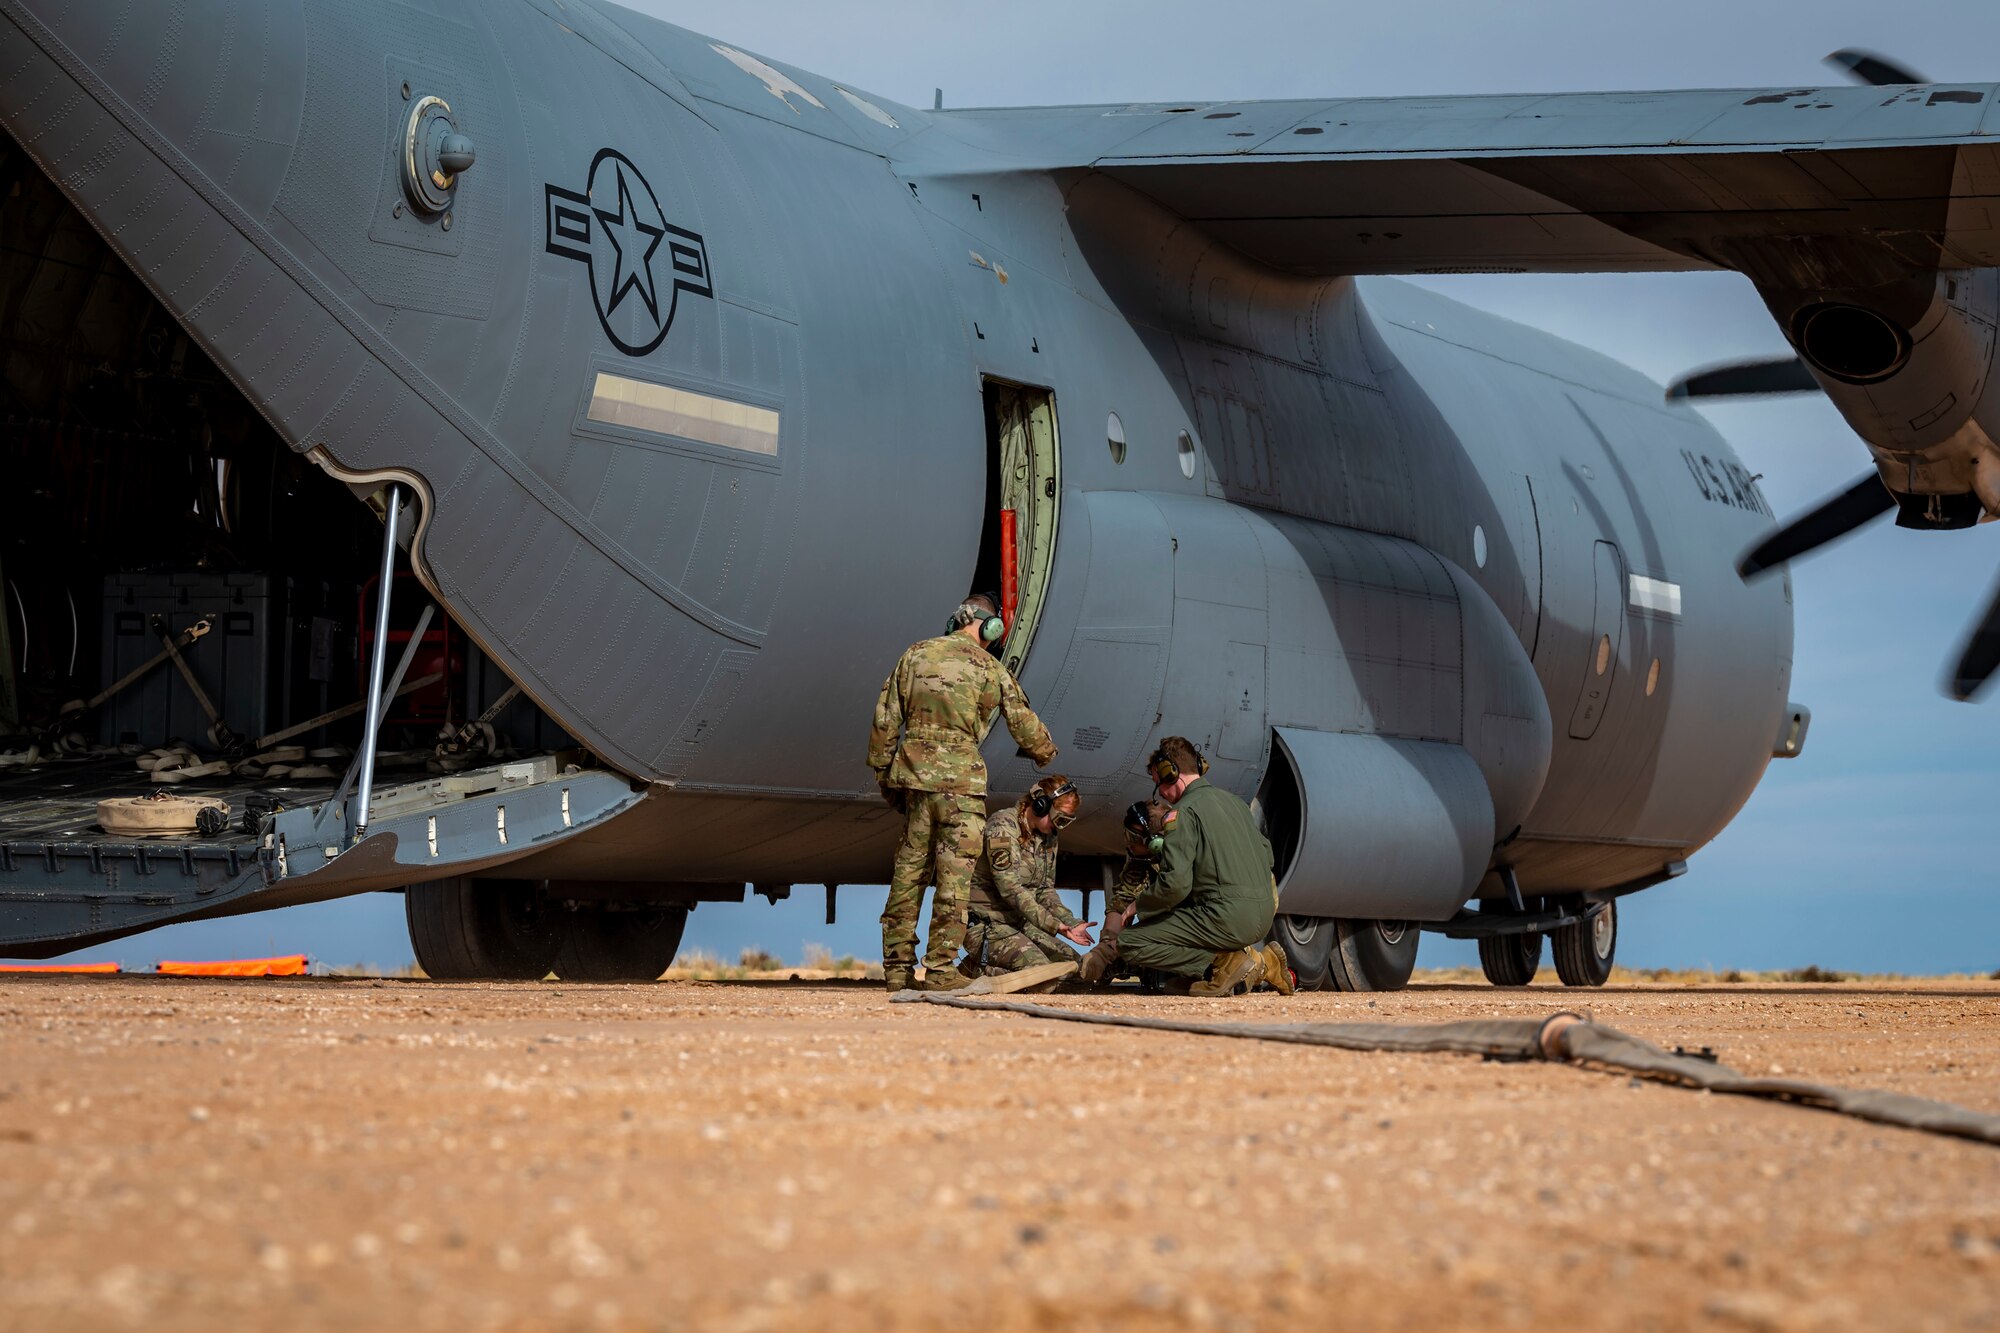 U.S. Airmen from the 40th Airlift Squadron pack up the Emergency Response Refueling Equipment Kit after simulating refueling a M1A2 Abrams tank from a C-130J Super Hercules at Fort Bliss, Texas, Dec. 9, 2022. The ERREK is a specialized fueling equipment used during hot refueling and allows for interoperable and mobile fuel support. (U.S. Air Force photo by Senior Airman Leon Redfern)